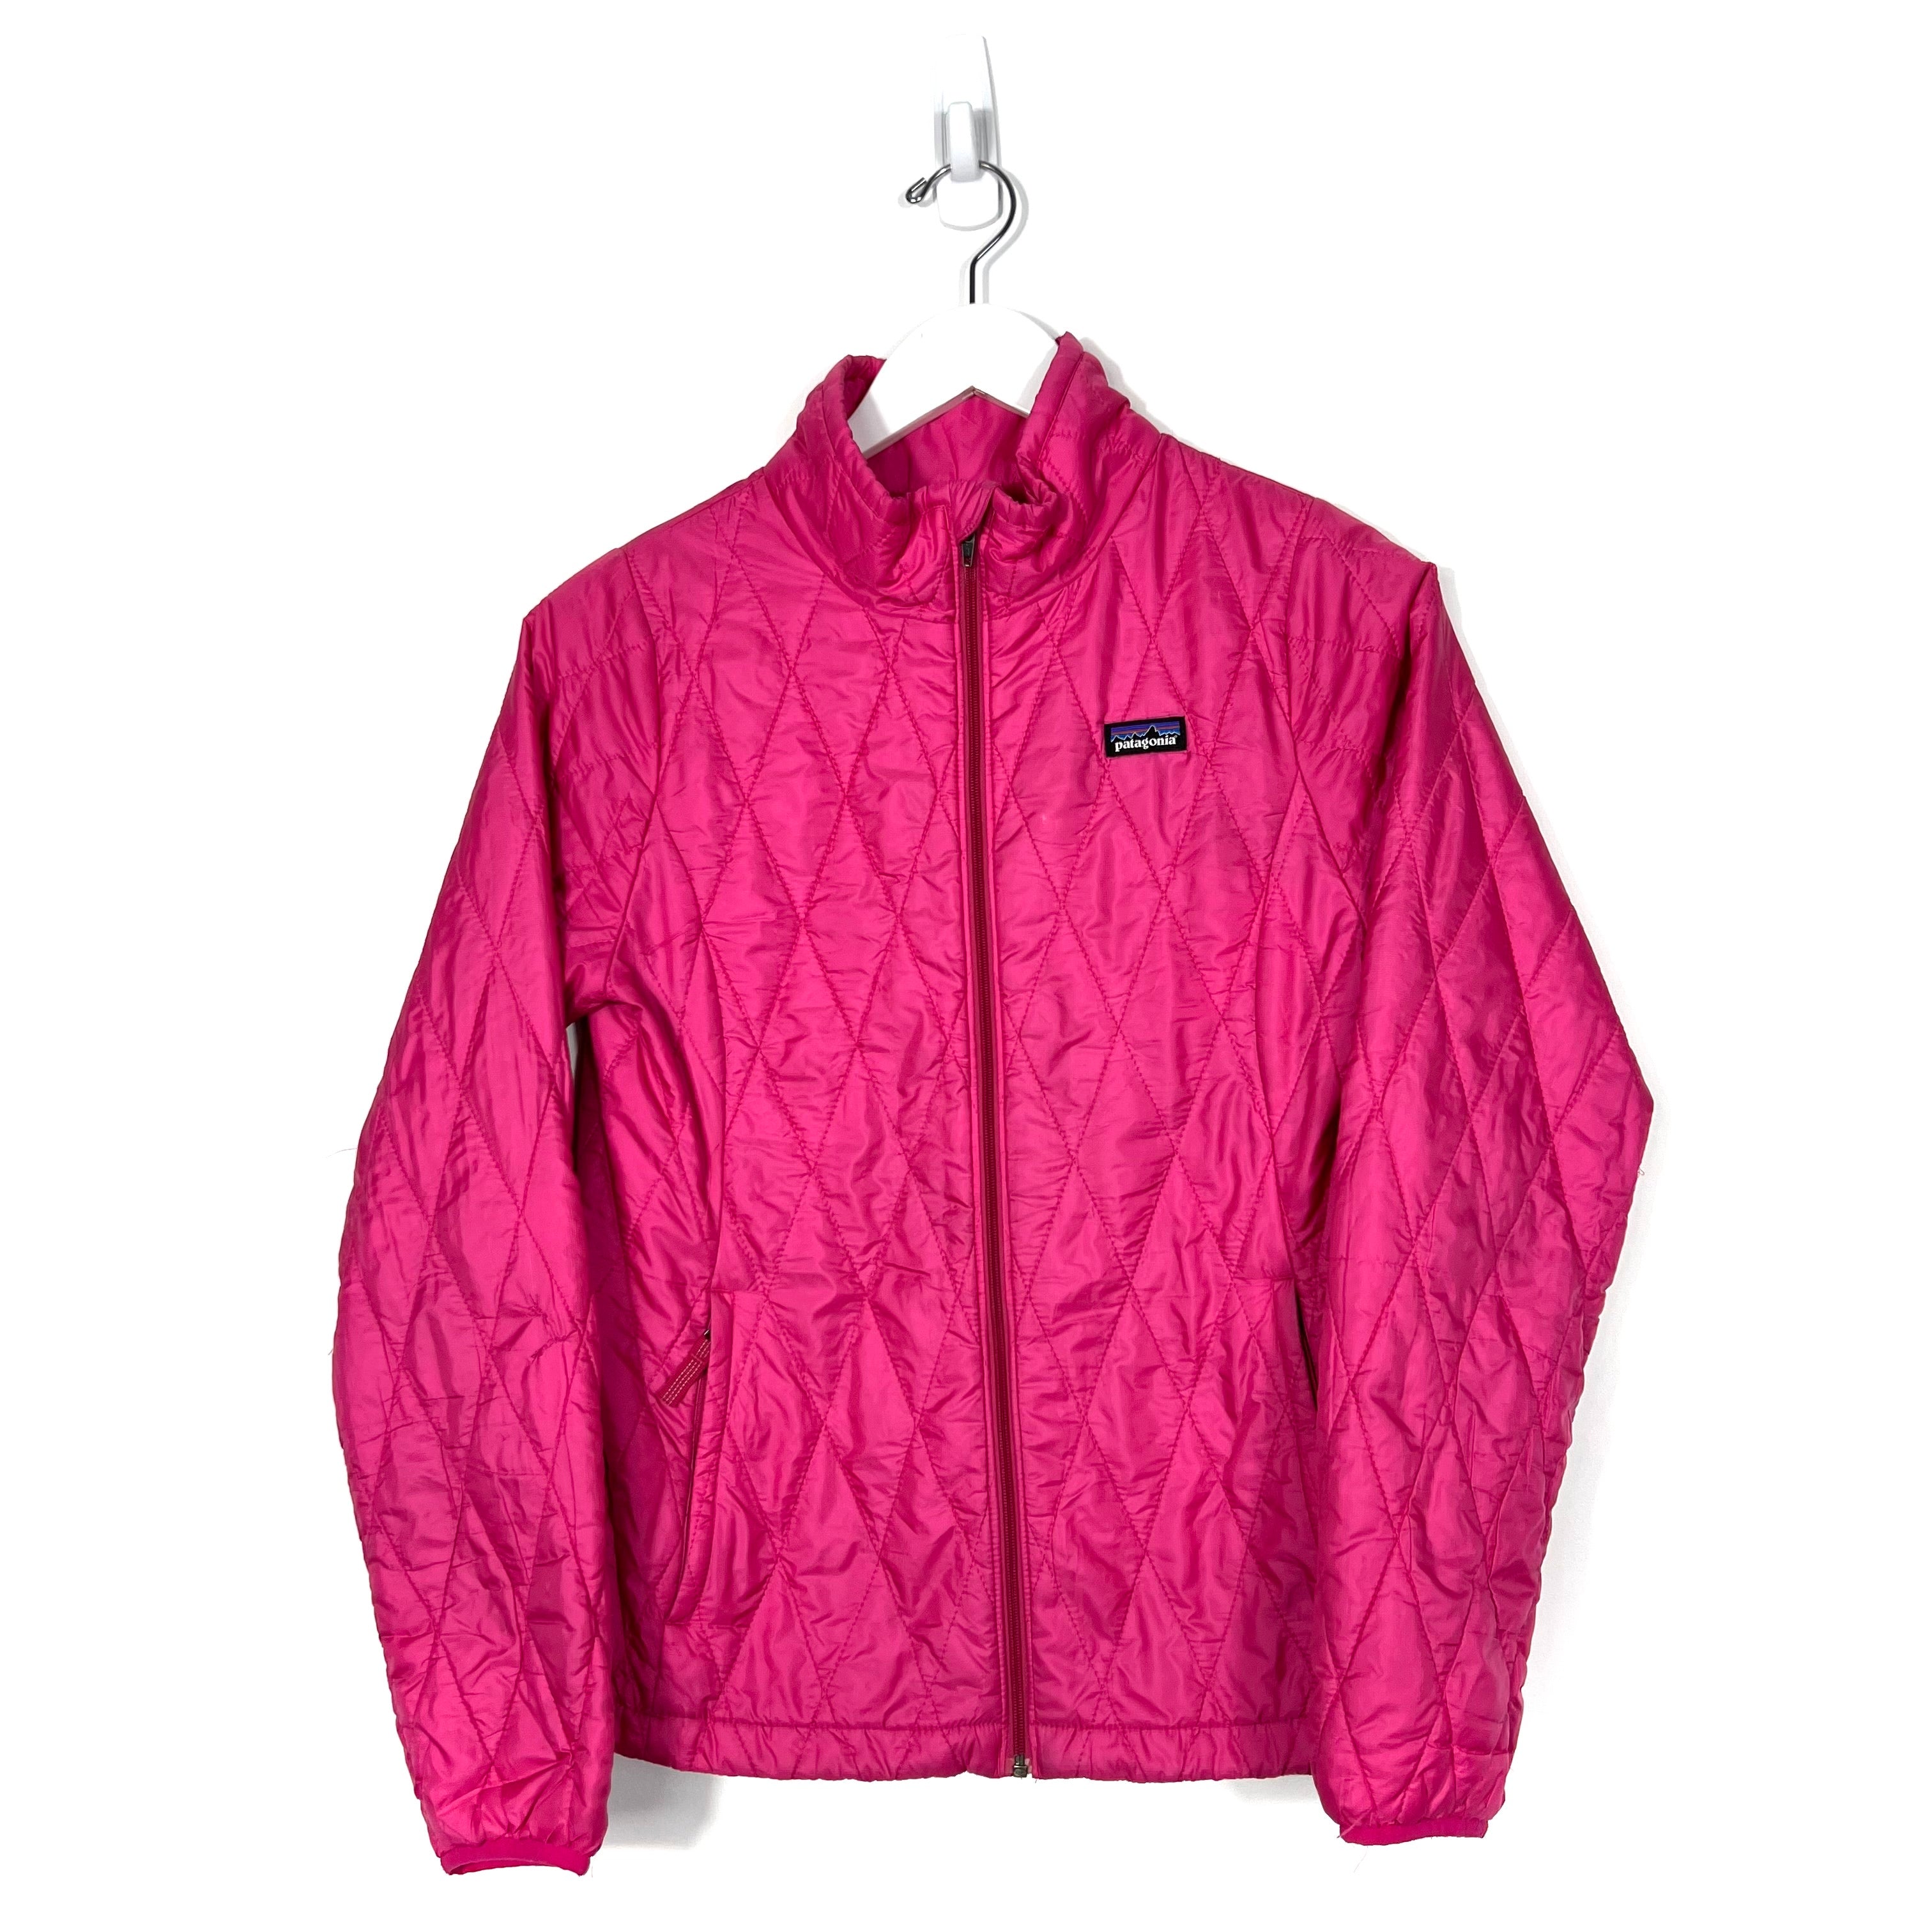 Patagonia Insulated Jacket - Women's Small